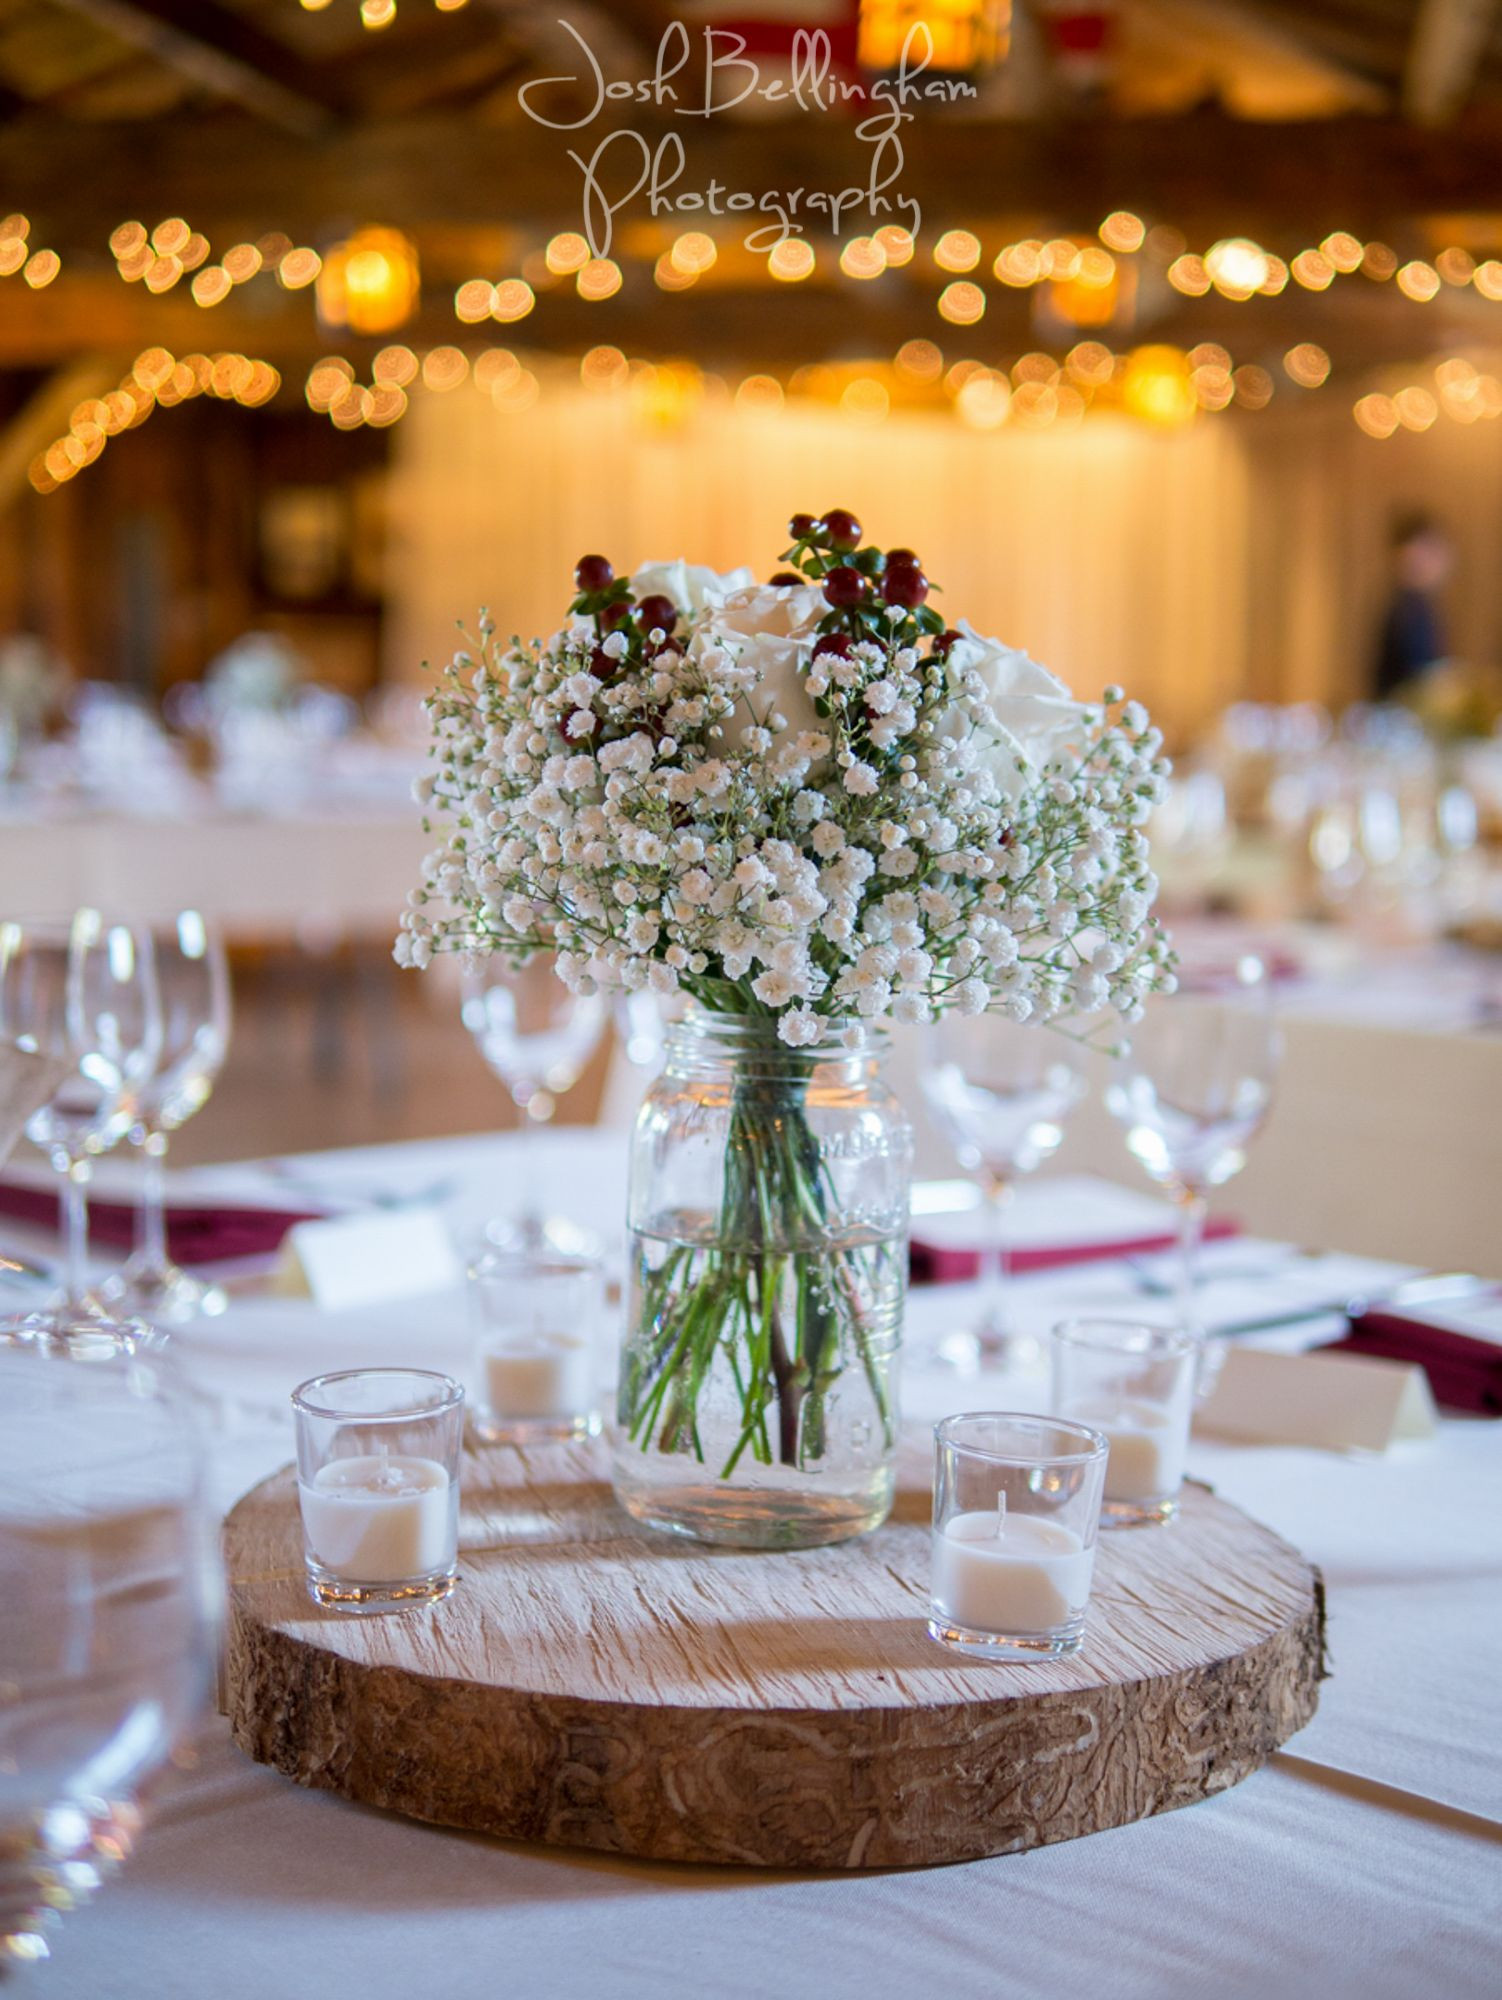 Wedding Tables Decoration
 Gorgeous Baby s Breath on Wooden Wedding Centerpieces I